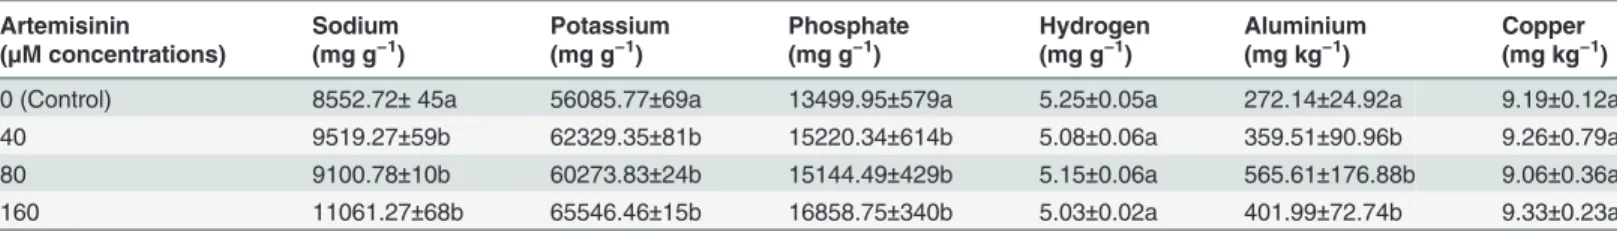 Table 3. Sodium (mg g −1 ), potassium (mg g −1 ), phosphate (mg g −1 ), hydrogen (mg g −1 ), aluminium (mg kg −1 ) and copper (mg kg −1 ) contents in leaves of thale cress following 1 week exposure to artemisinin at 0, 40, 80, 160 μM concentrations in leav